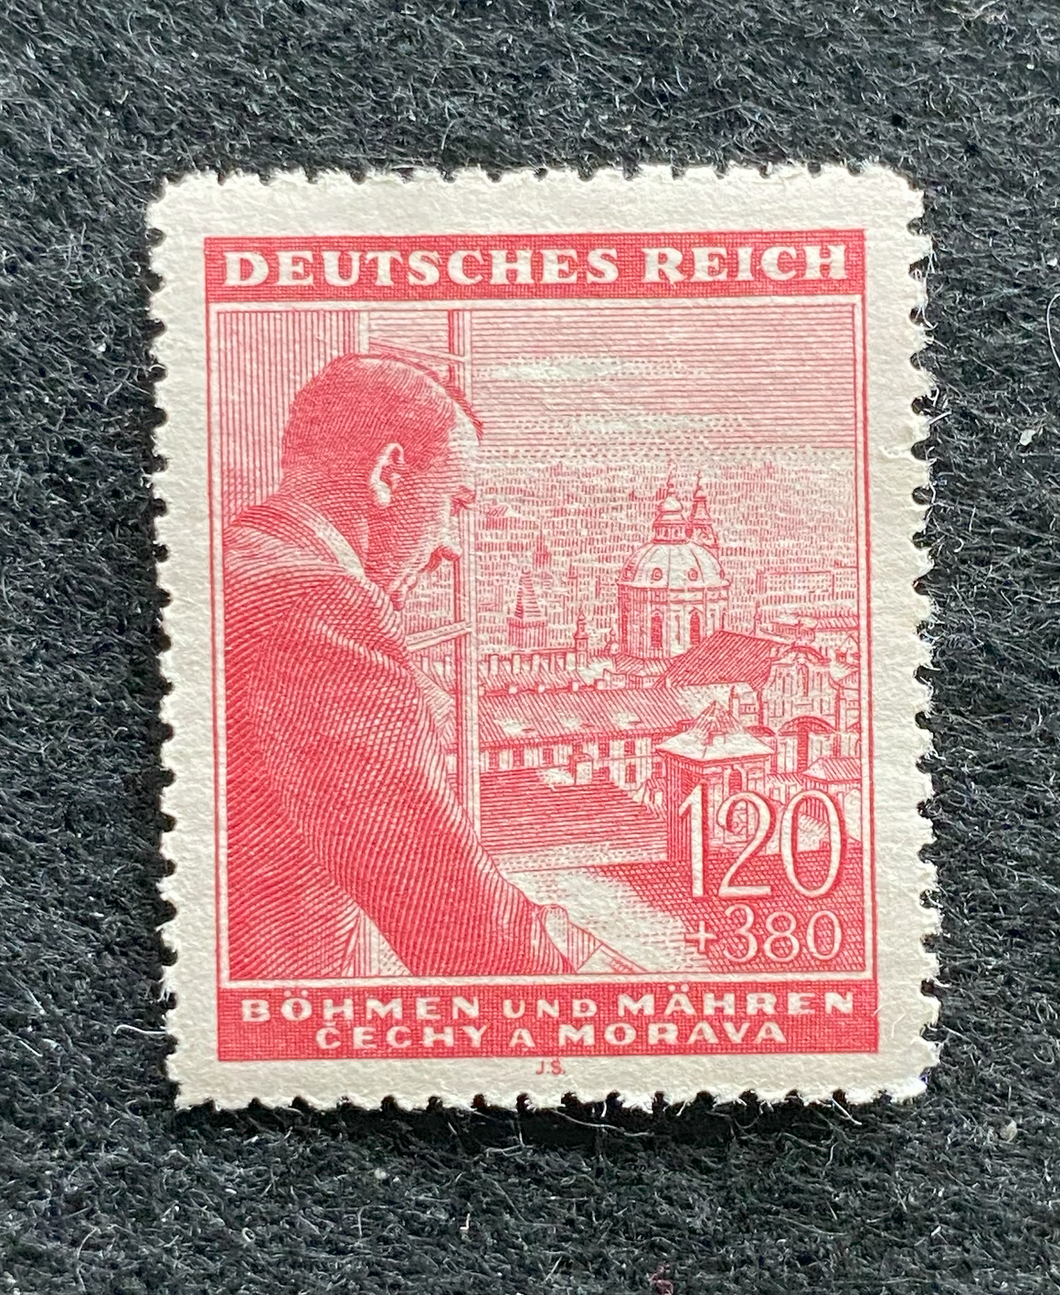 Rare Old Antique Authentic WWII German Hitler Unused Stamp - 120 Rp